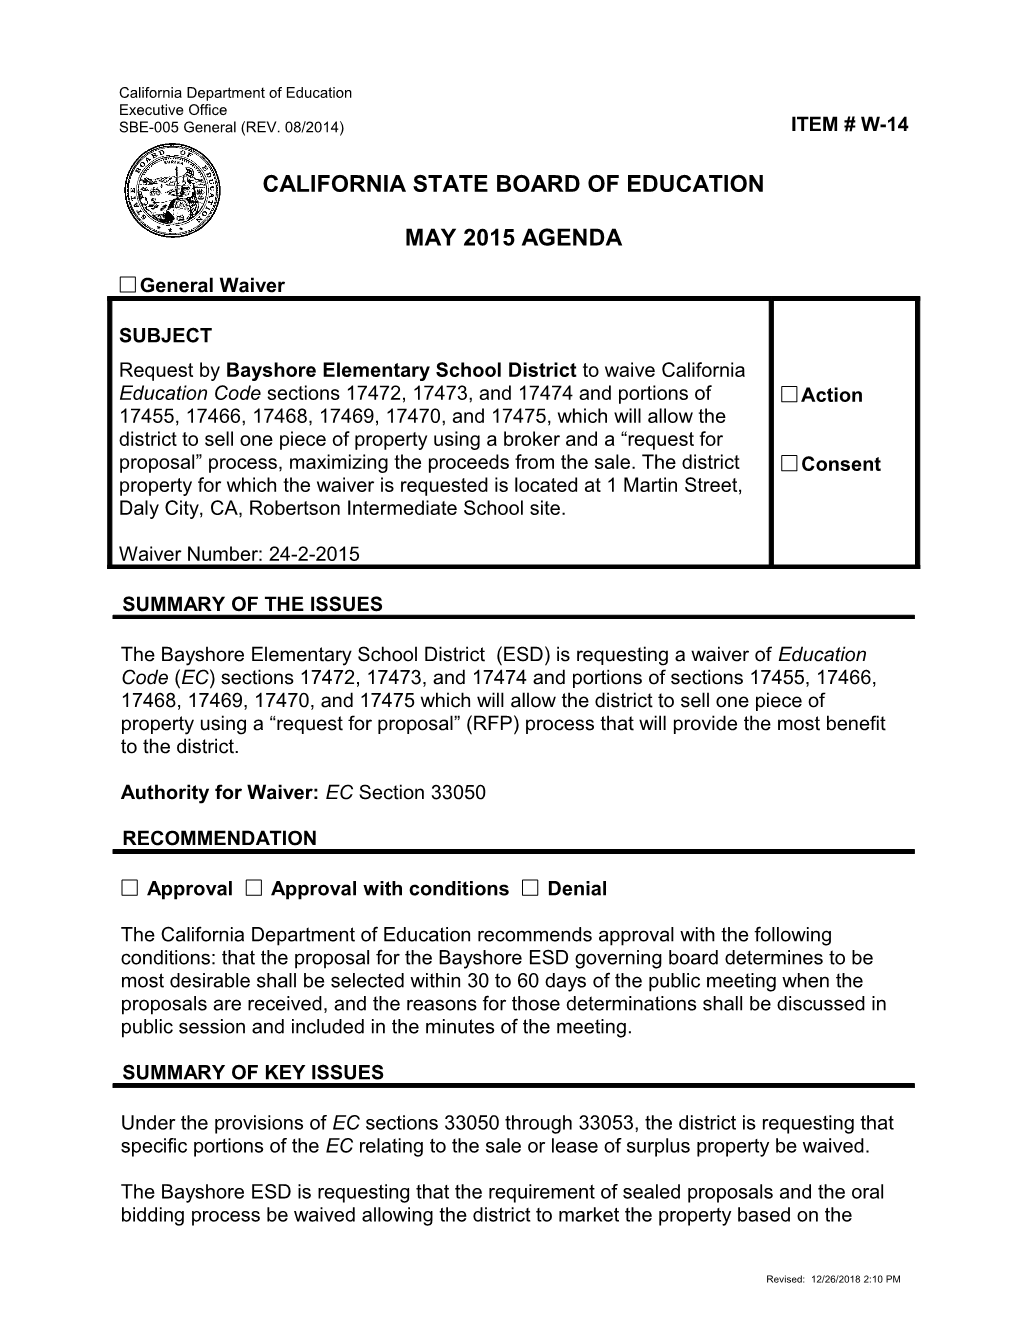 May 2015 Waiver Item W-14 - Meeting Agendas (CA State Board of Education)